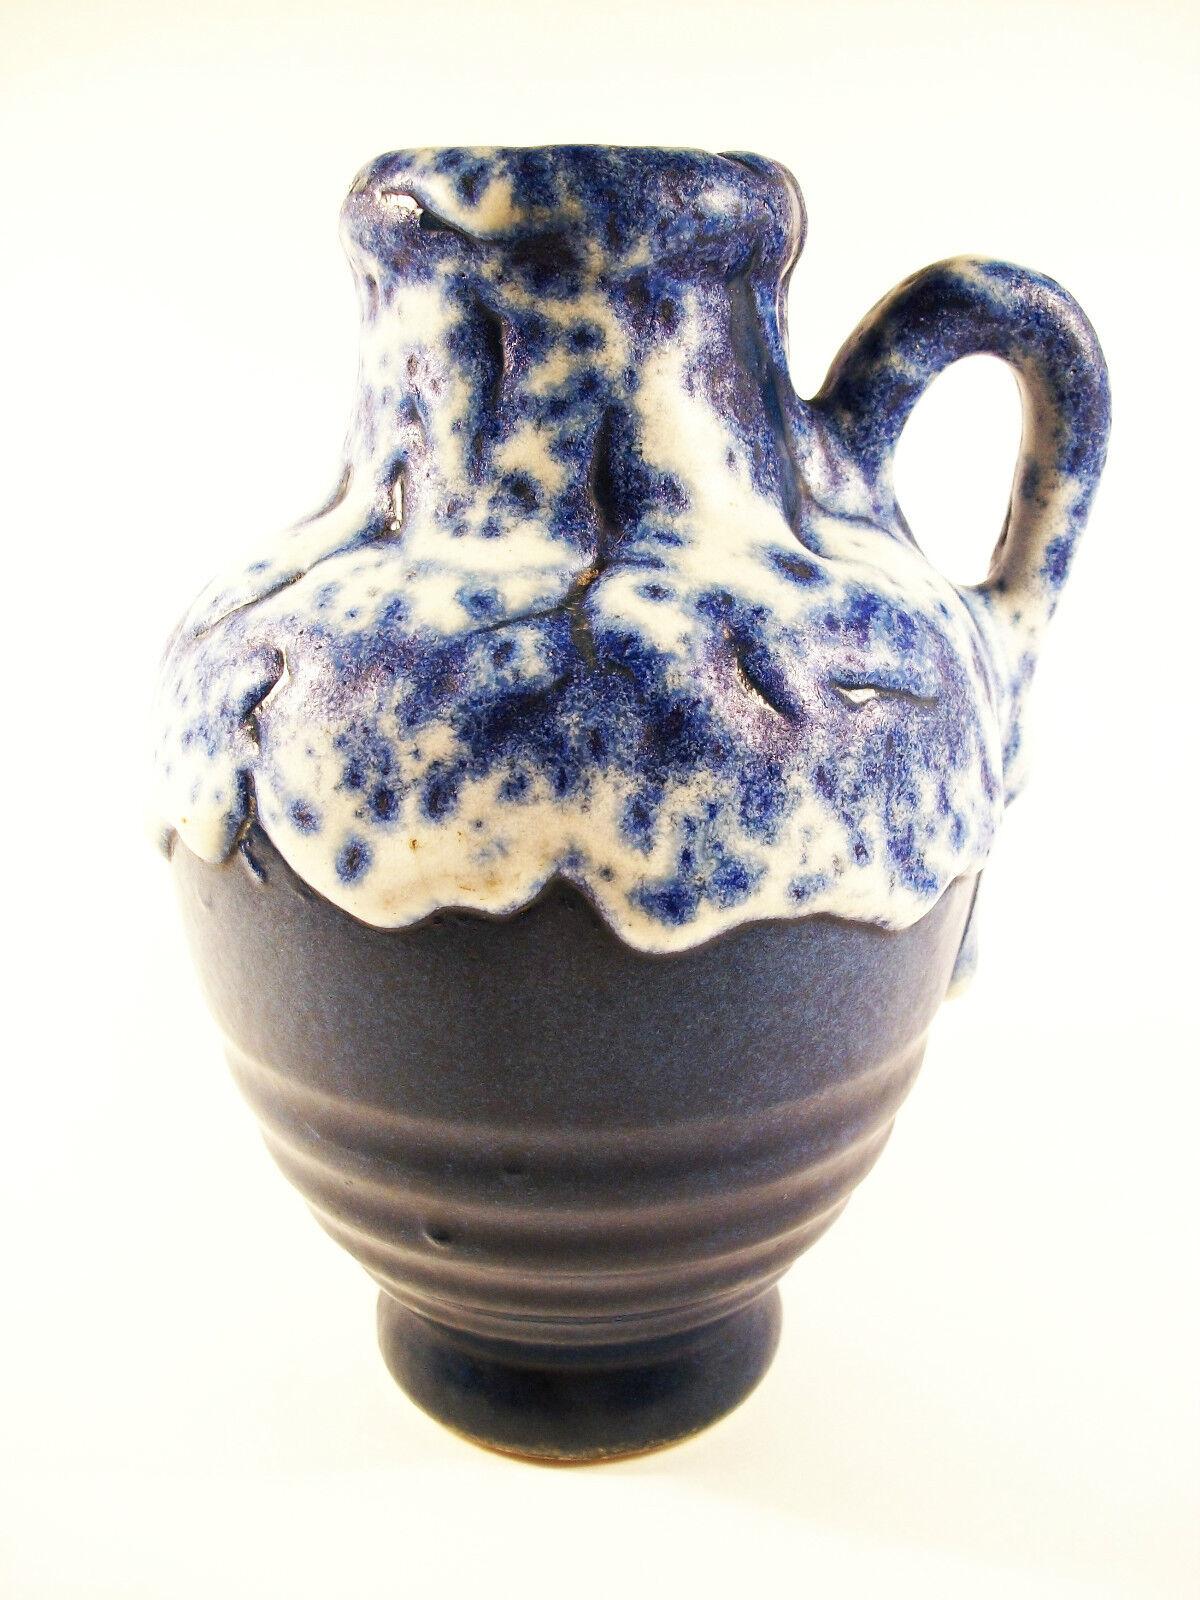 Mid Century extraordinary fat lava glaze ceramic vase/jug - indistinctly signed on the base - model number 805/46 - West Germany - circa 1950's.

Excellent vintage condition - no loss - old minor glaze chip with restoration.

Size - 4 3/4